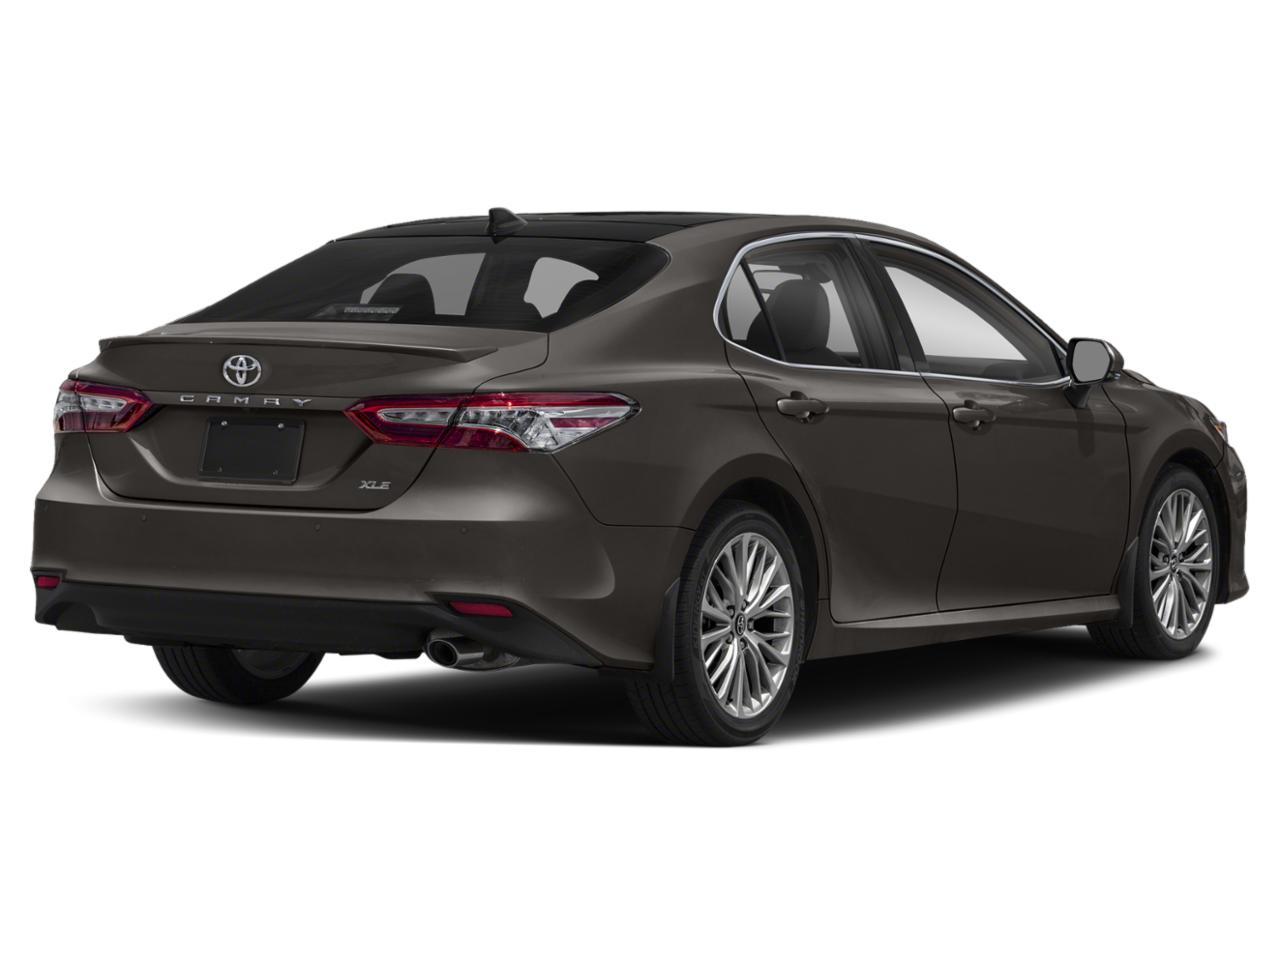 Learn About This 2019 Toyota Camry For Sale in GRANGEVILLE, ID, VIN =  4T1B11HK1KU255569, SN# A3106A